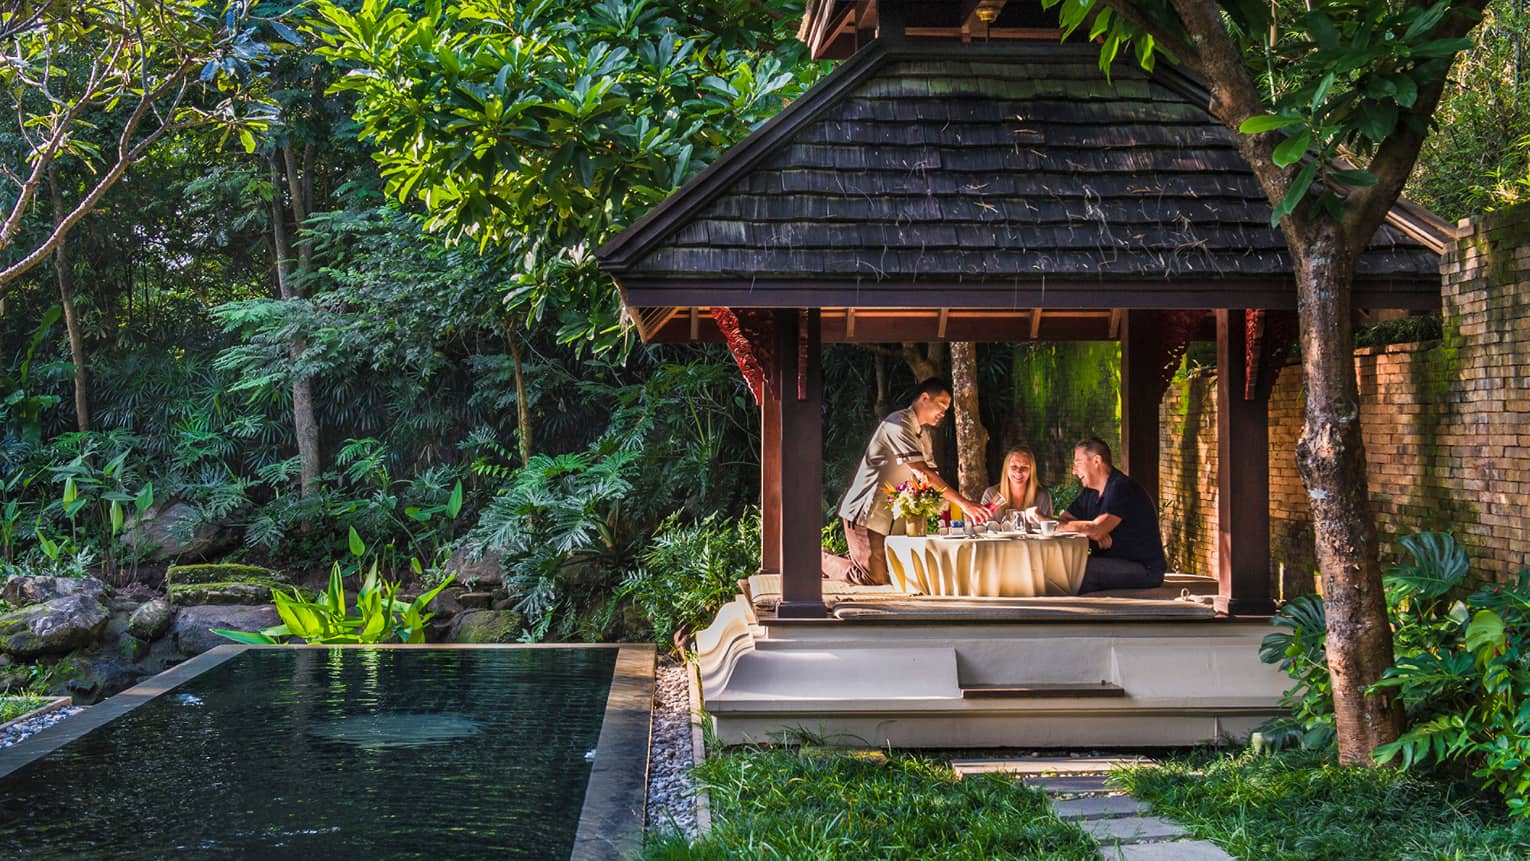 Hotel staff pours fresh juice for couple at private patio dining table under wood gazebo